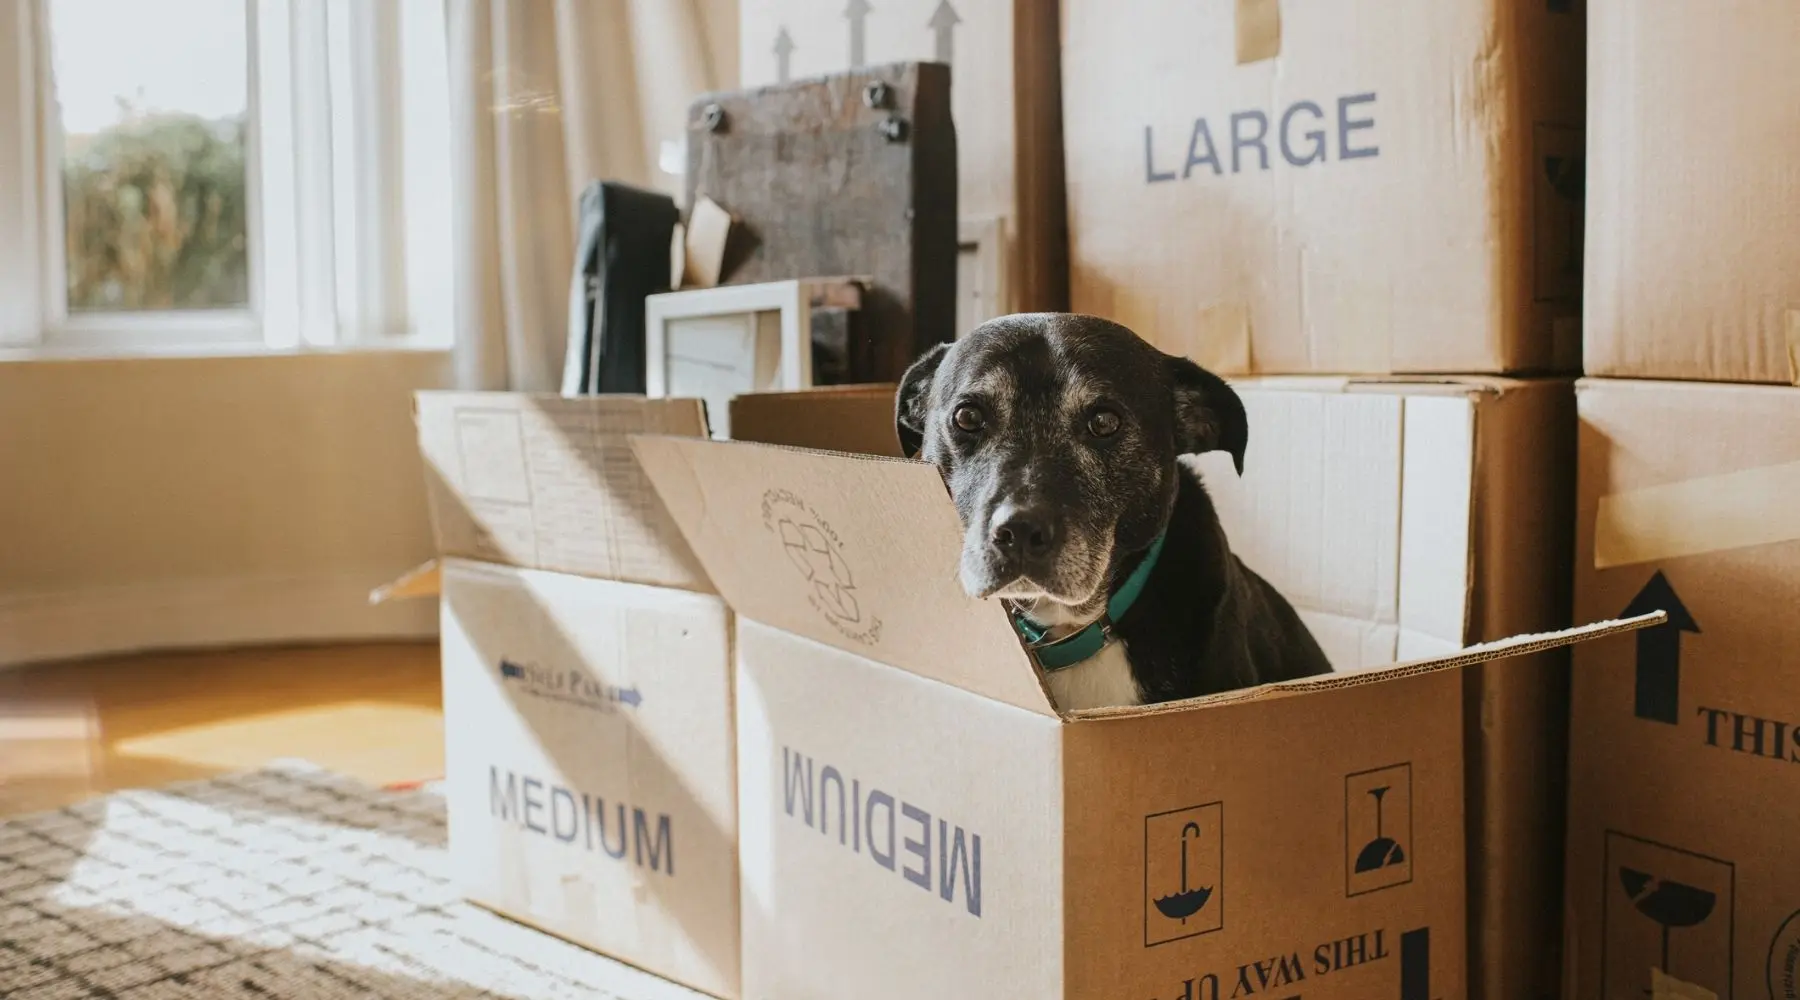 A sunny living room with many cardboard boxes, filled with possessions. In the foreground sits a box with a black dog peering out.